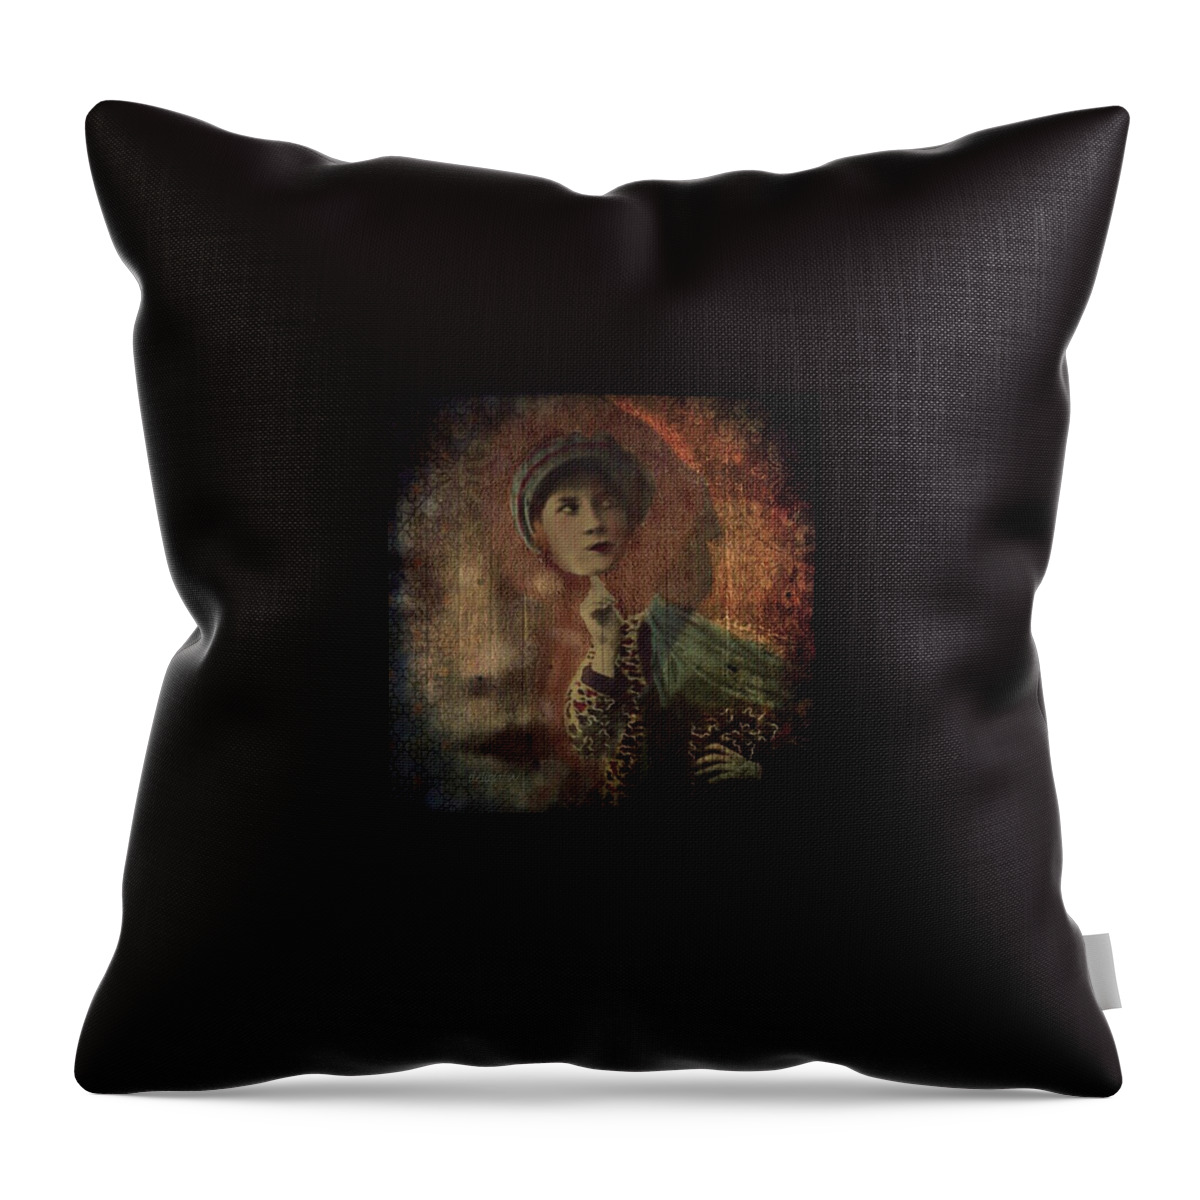 Woman Throw Pillow featuring the digital art Disconnect by Delight Worthyn